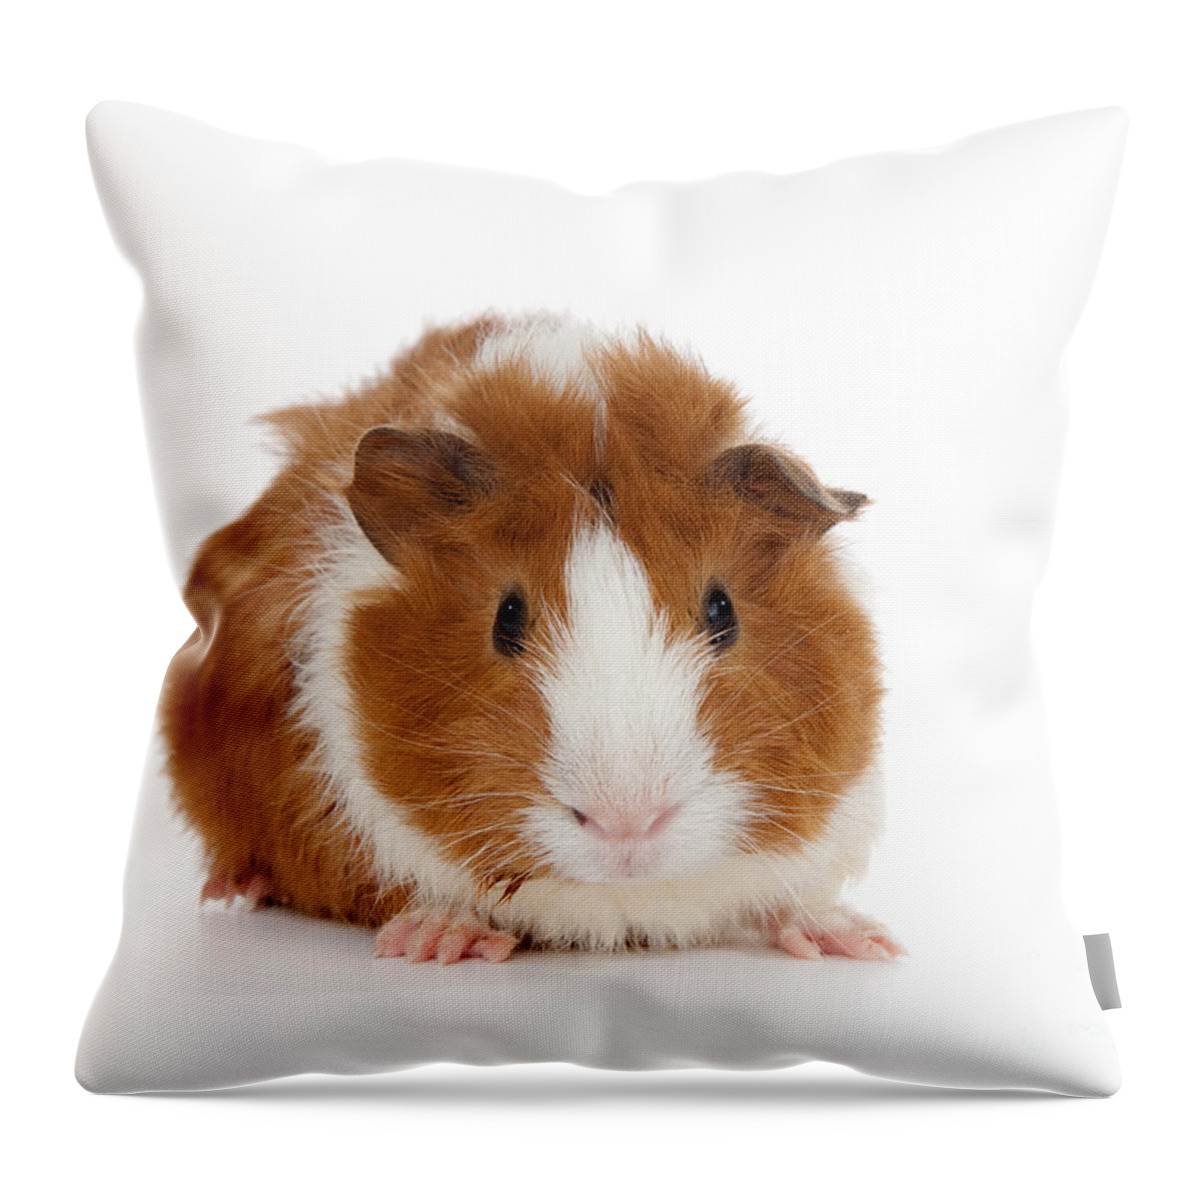 Abyssinian Guinea Pig Throw Pillow featuring the photograph Abyssinian Guinea Pig #2 by Anthony Totah